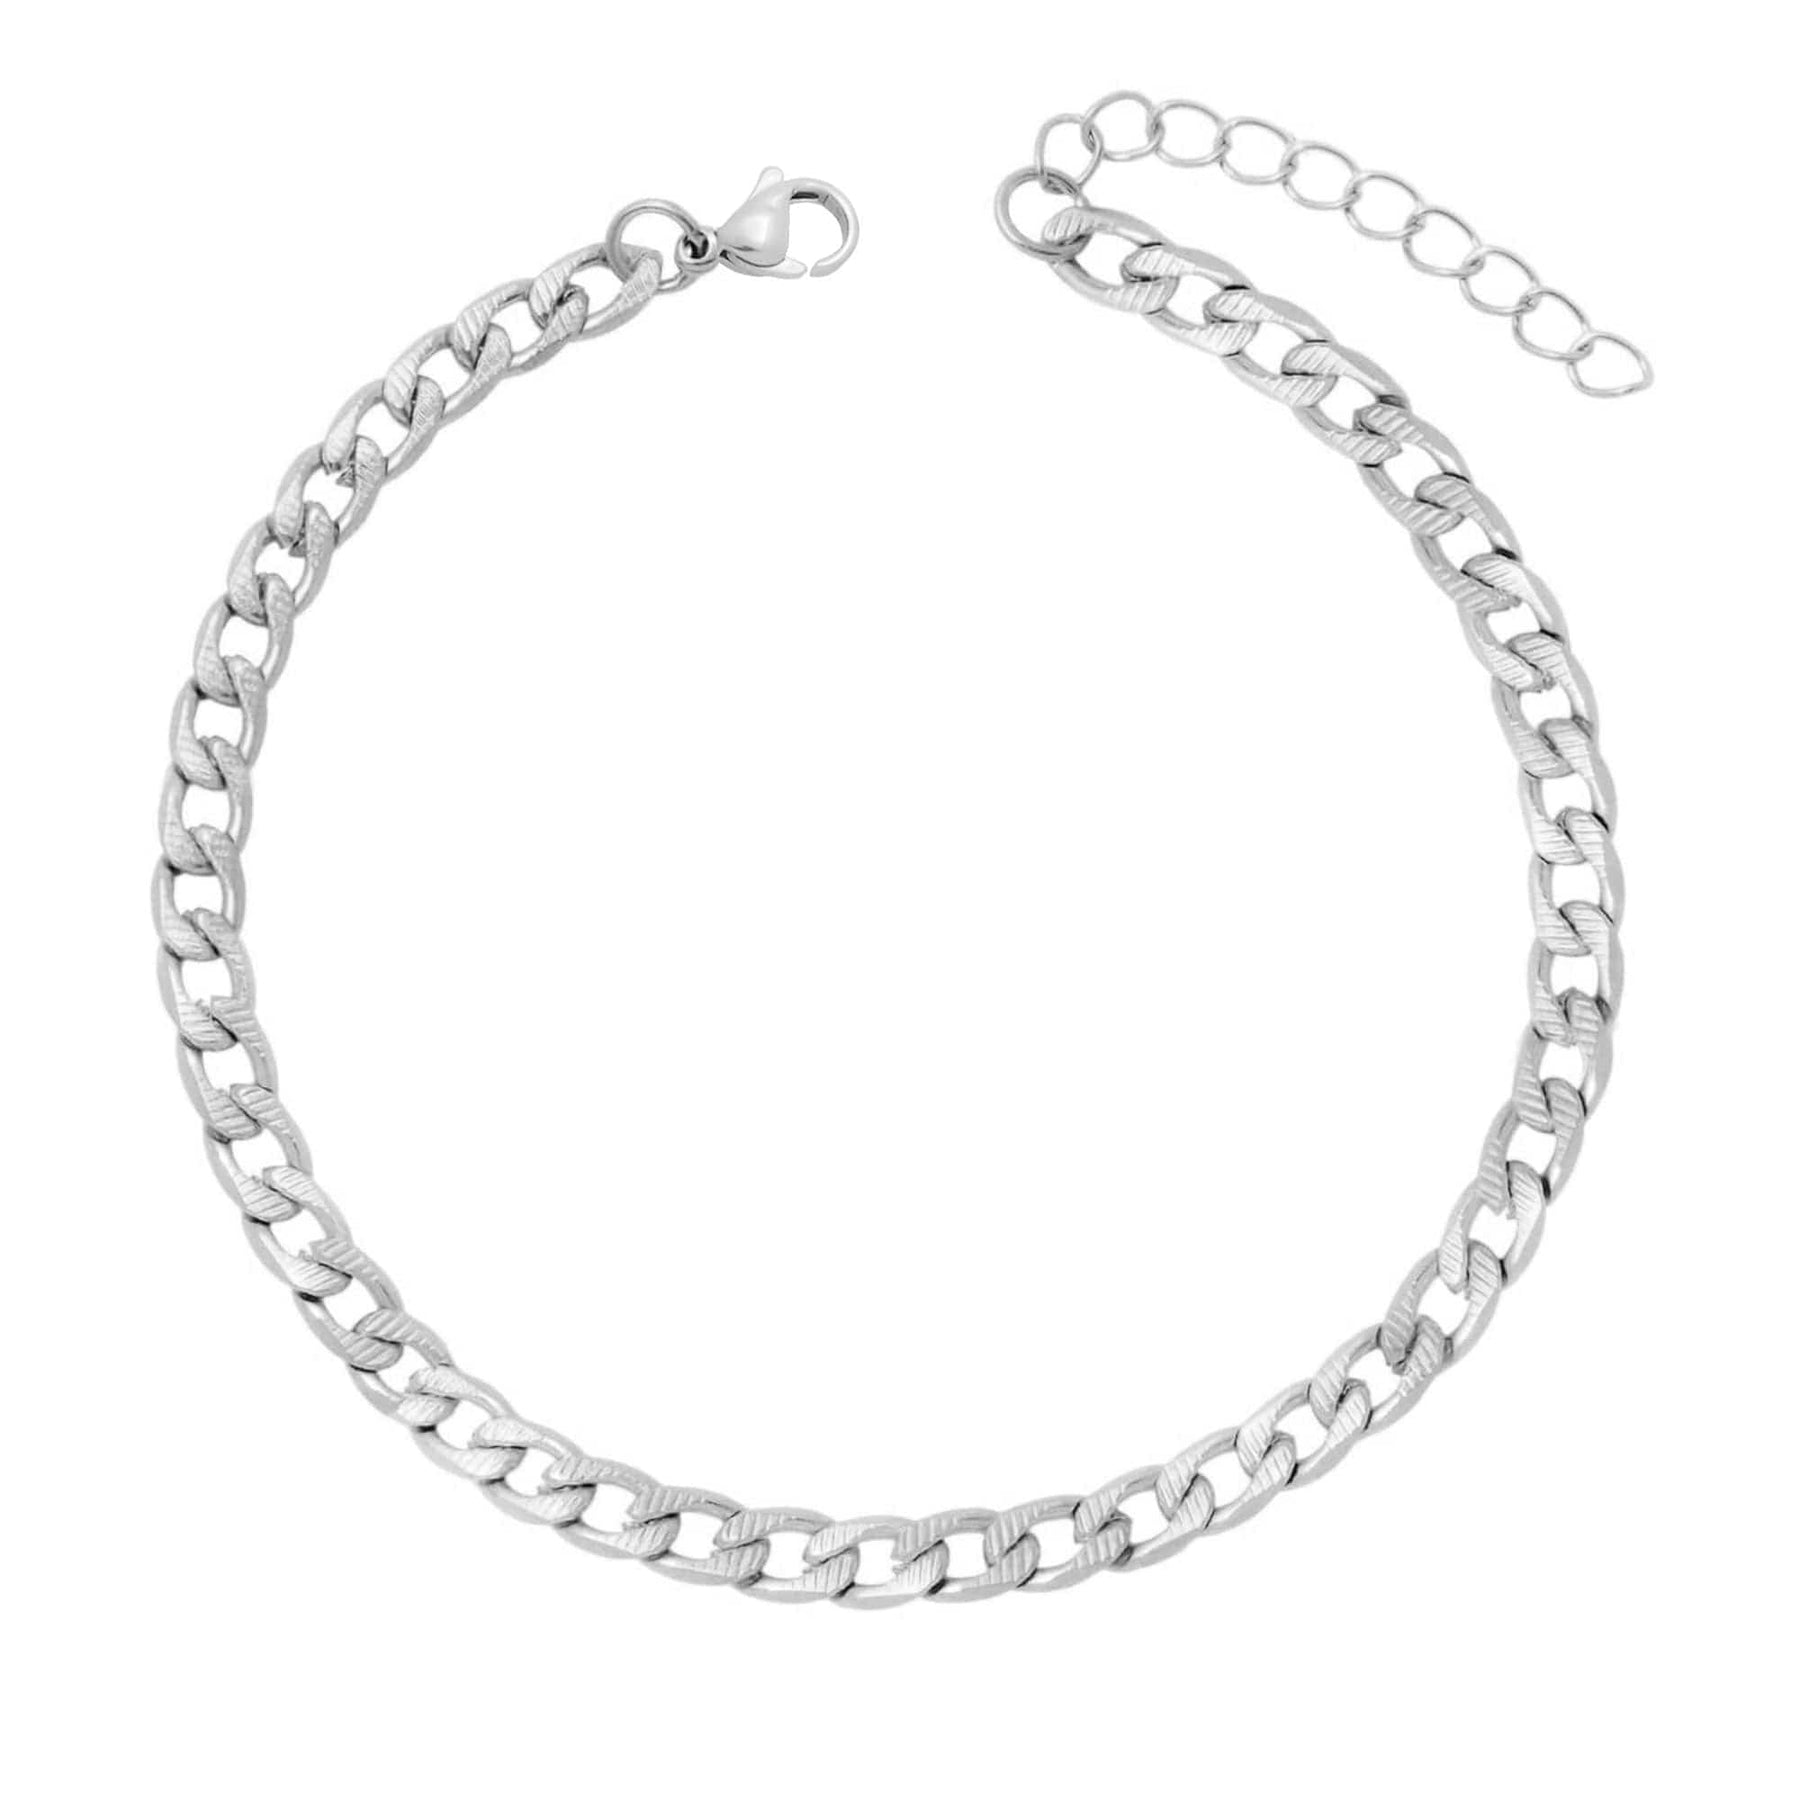 BohoMoon Stainless Steel Janis Anklet Silver